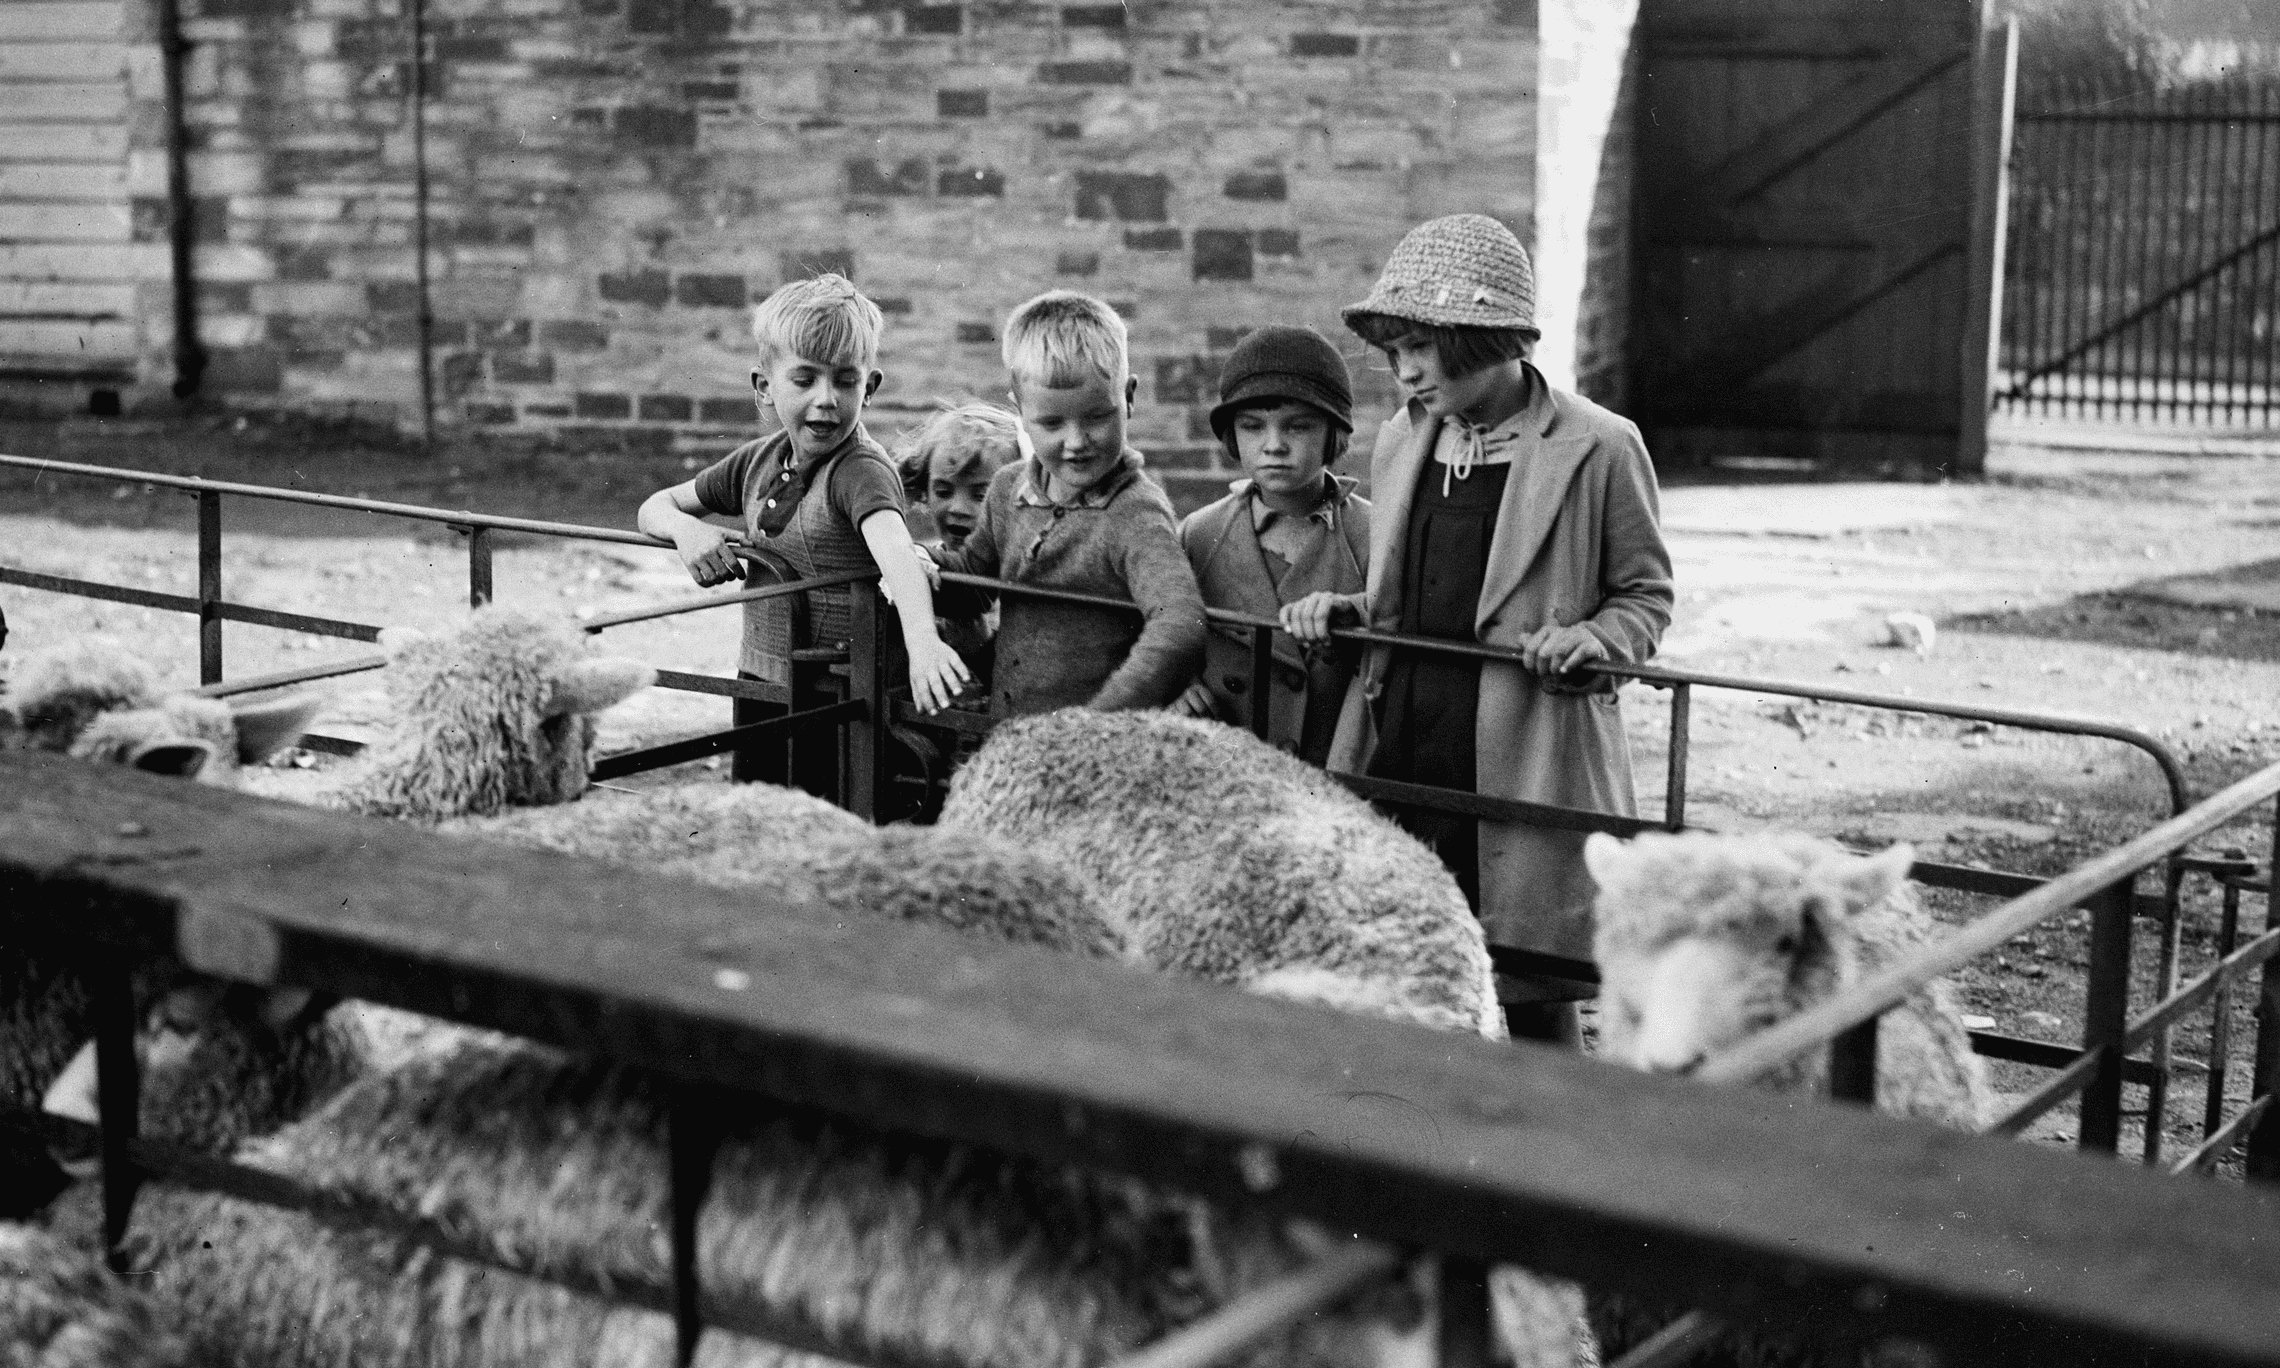 Children looking at sheep in a pen at Bodmin Market